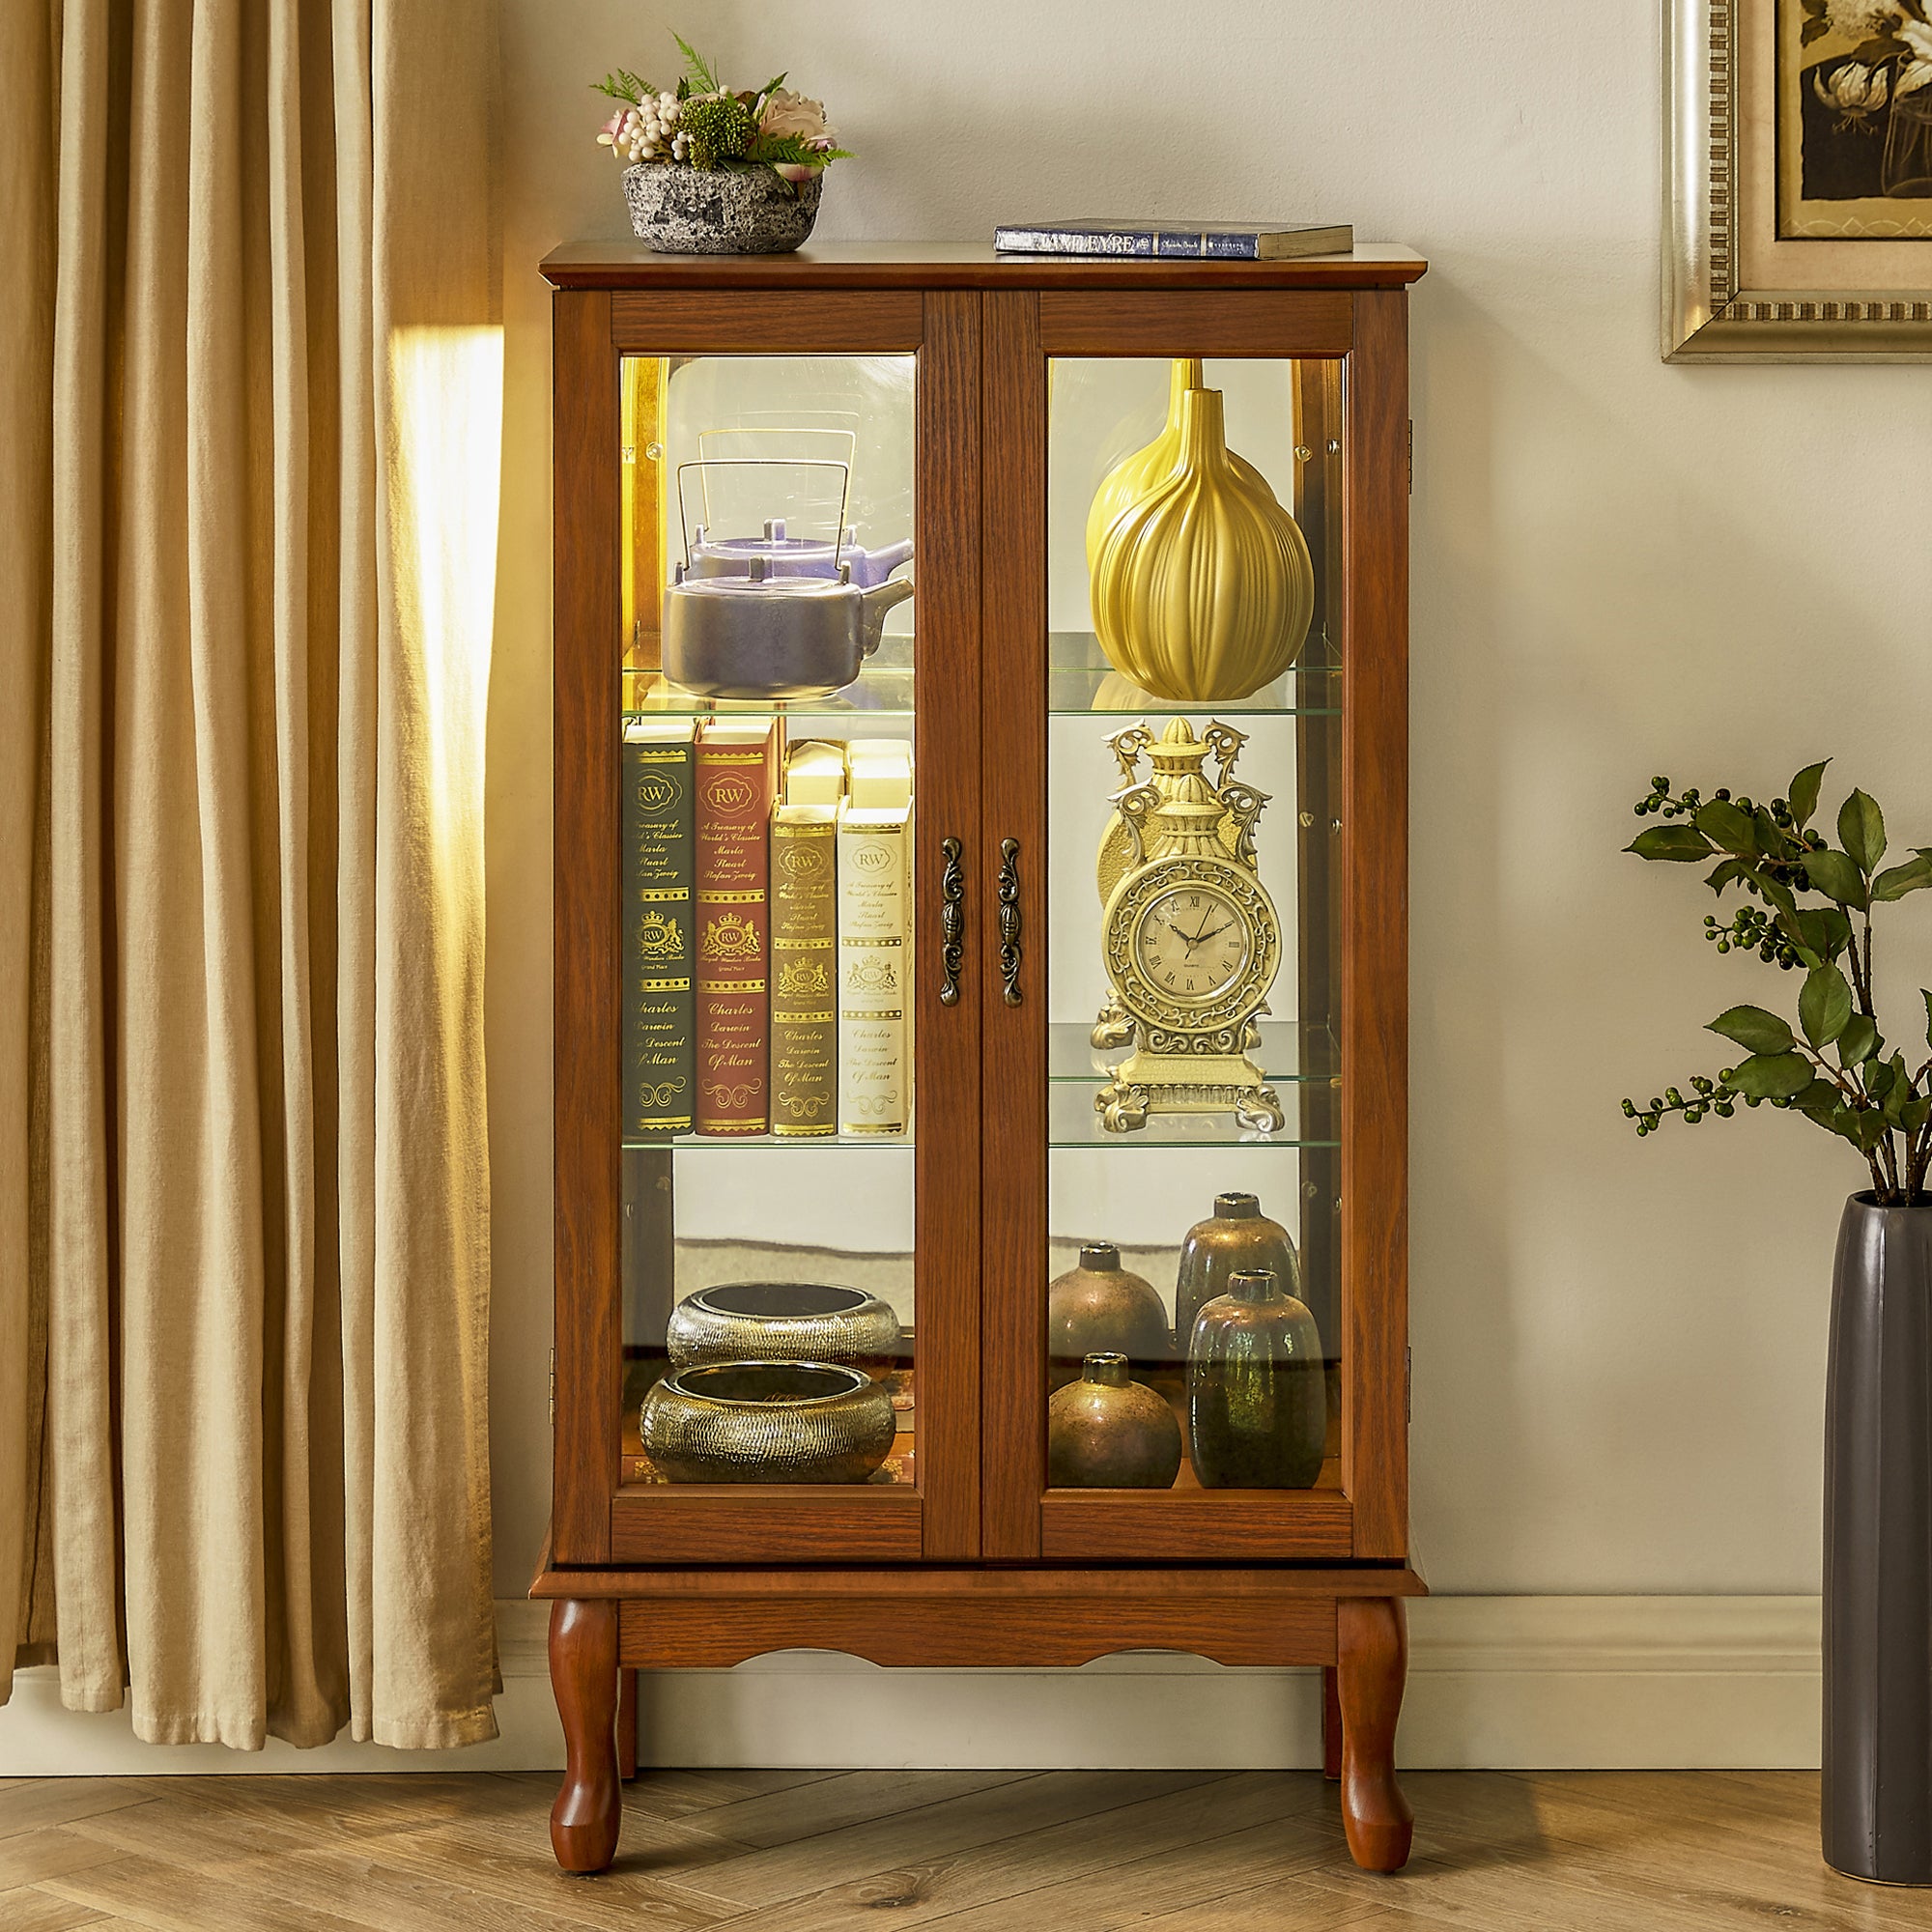 Lighted Diapaly Curio Cabinet with Adjustable Shelves and Mirrored Back Panel, Tempered Glass Doors (Oak, 3 Tier), (E26 light bulb not included)